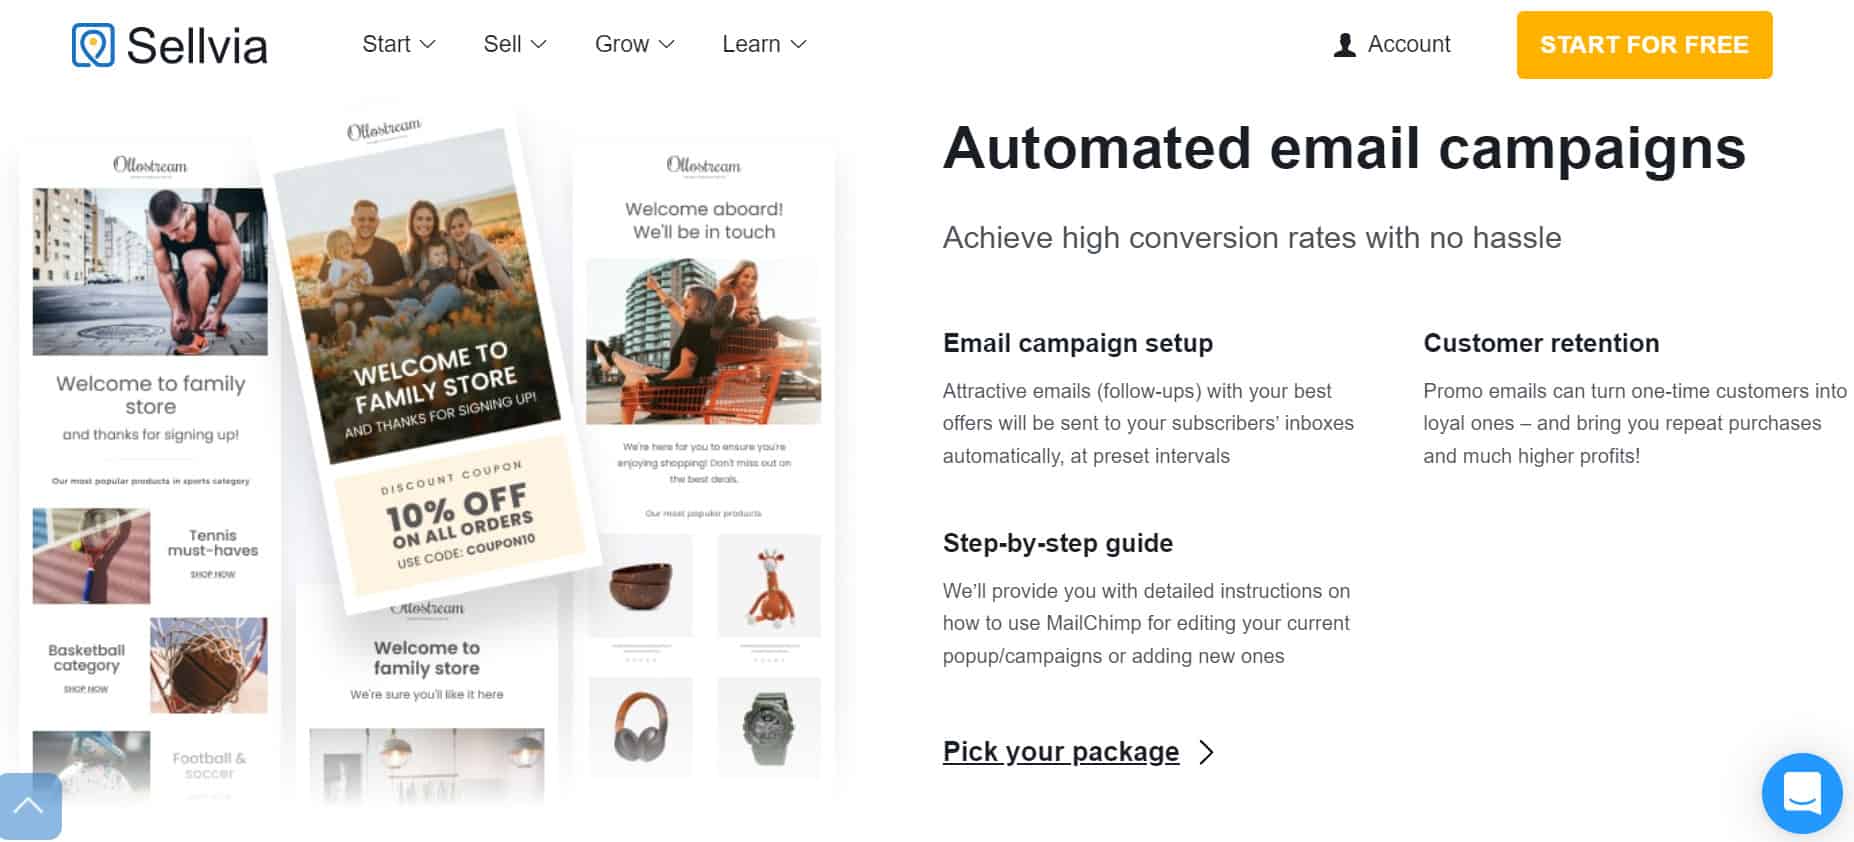 automated email campaigns in sellvia